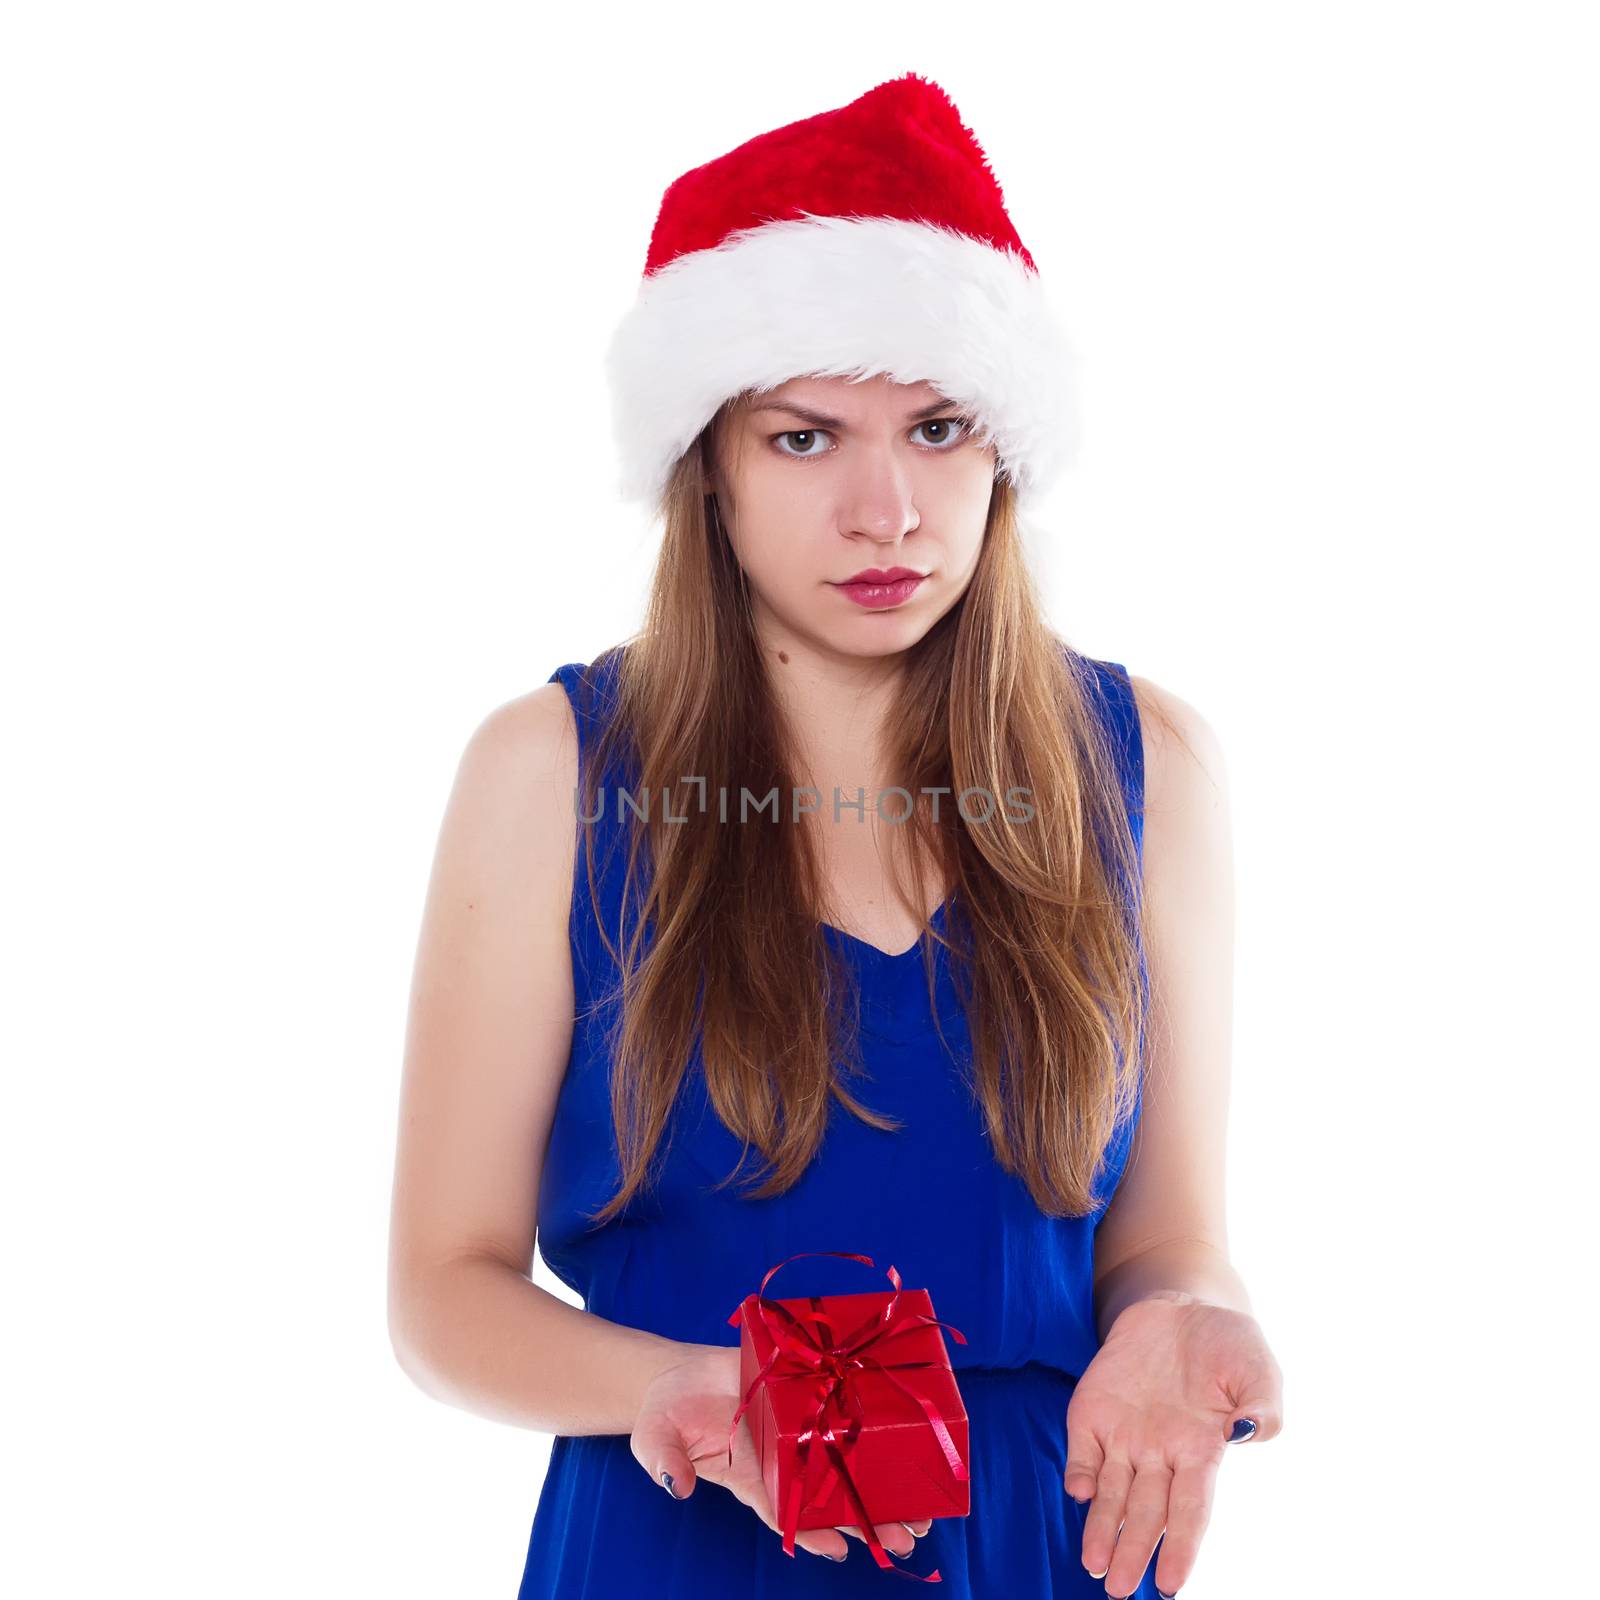 Girl in Christmas hat gift upset. On a white background by victosha